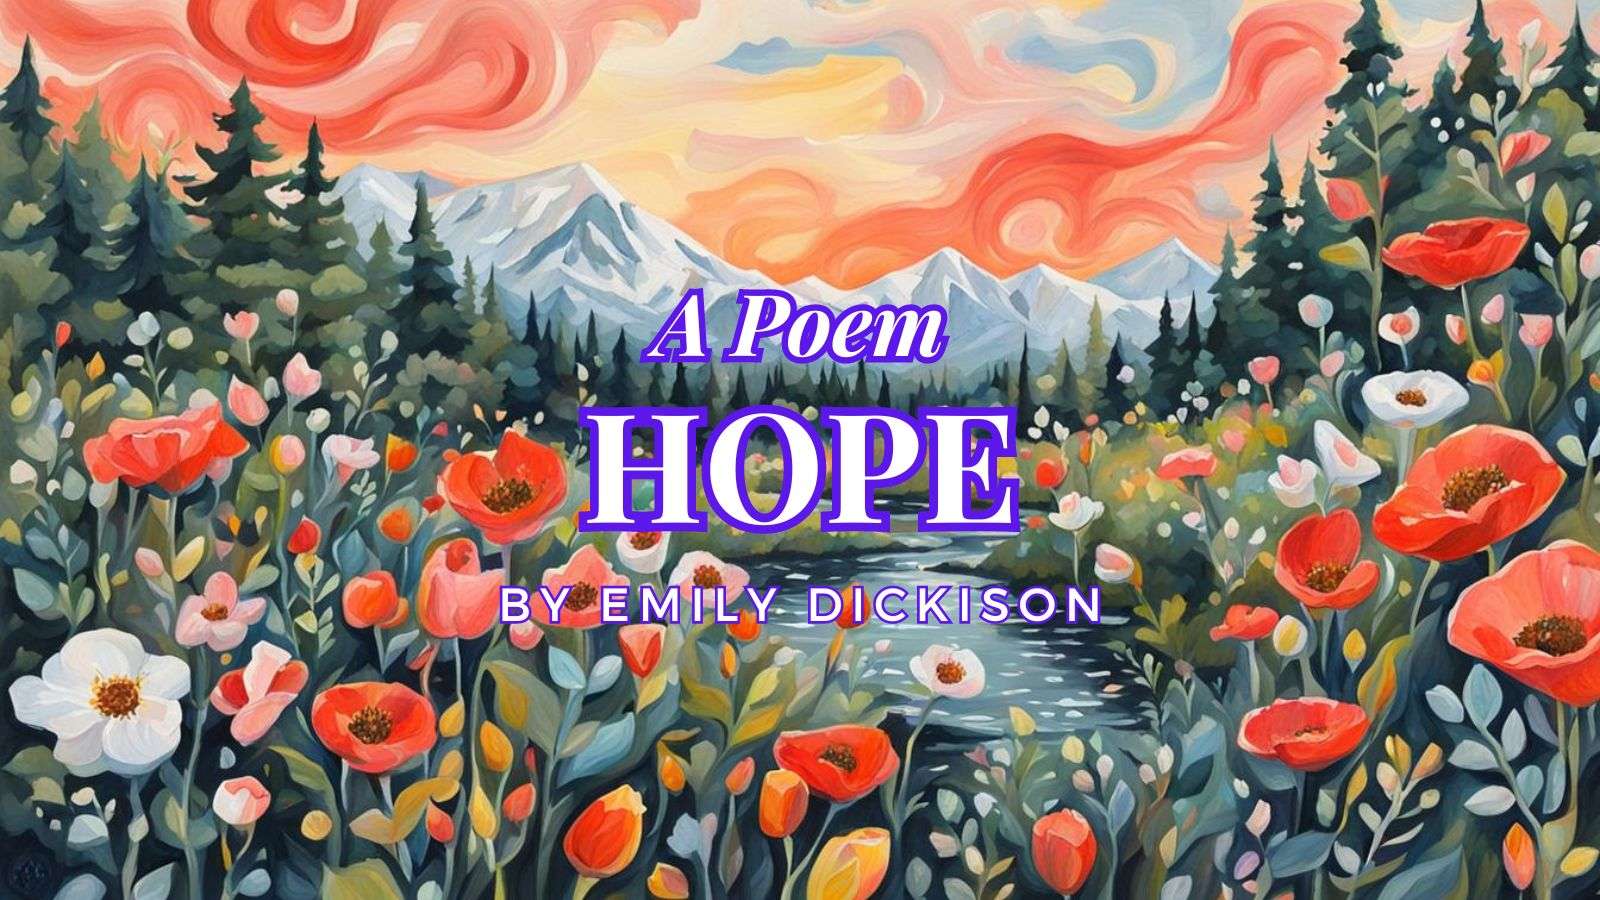 Hope by Emily Dickinson